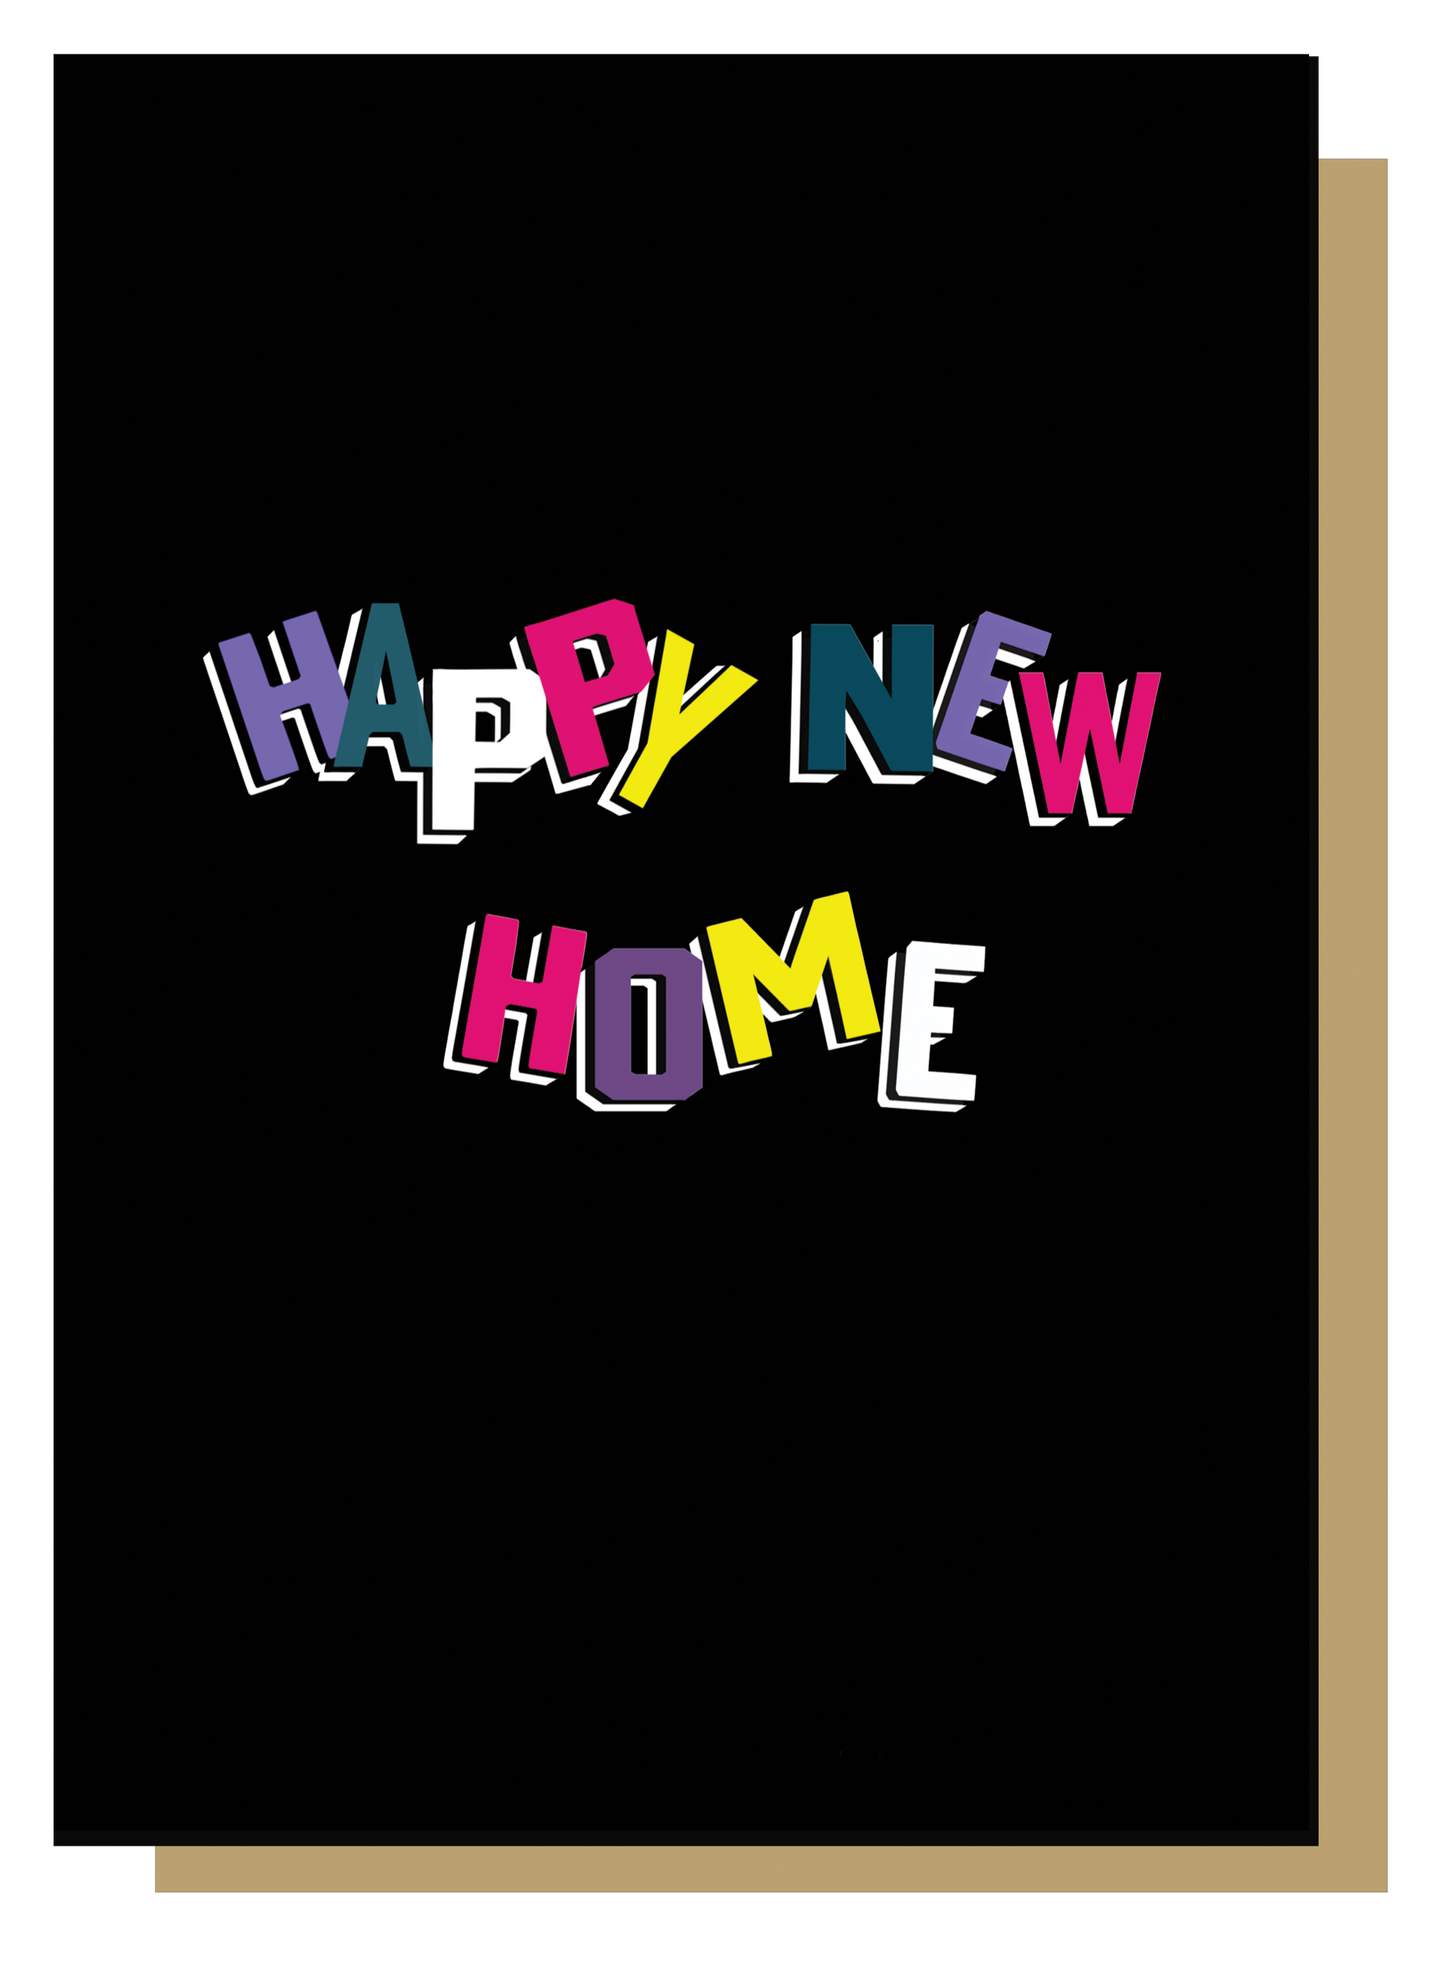 Happy New Home Greetings Card On Black  Background by Wayward